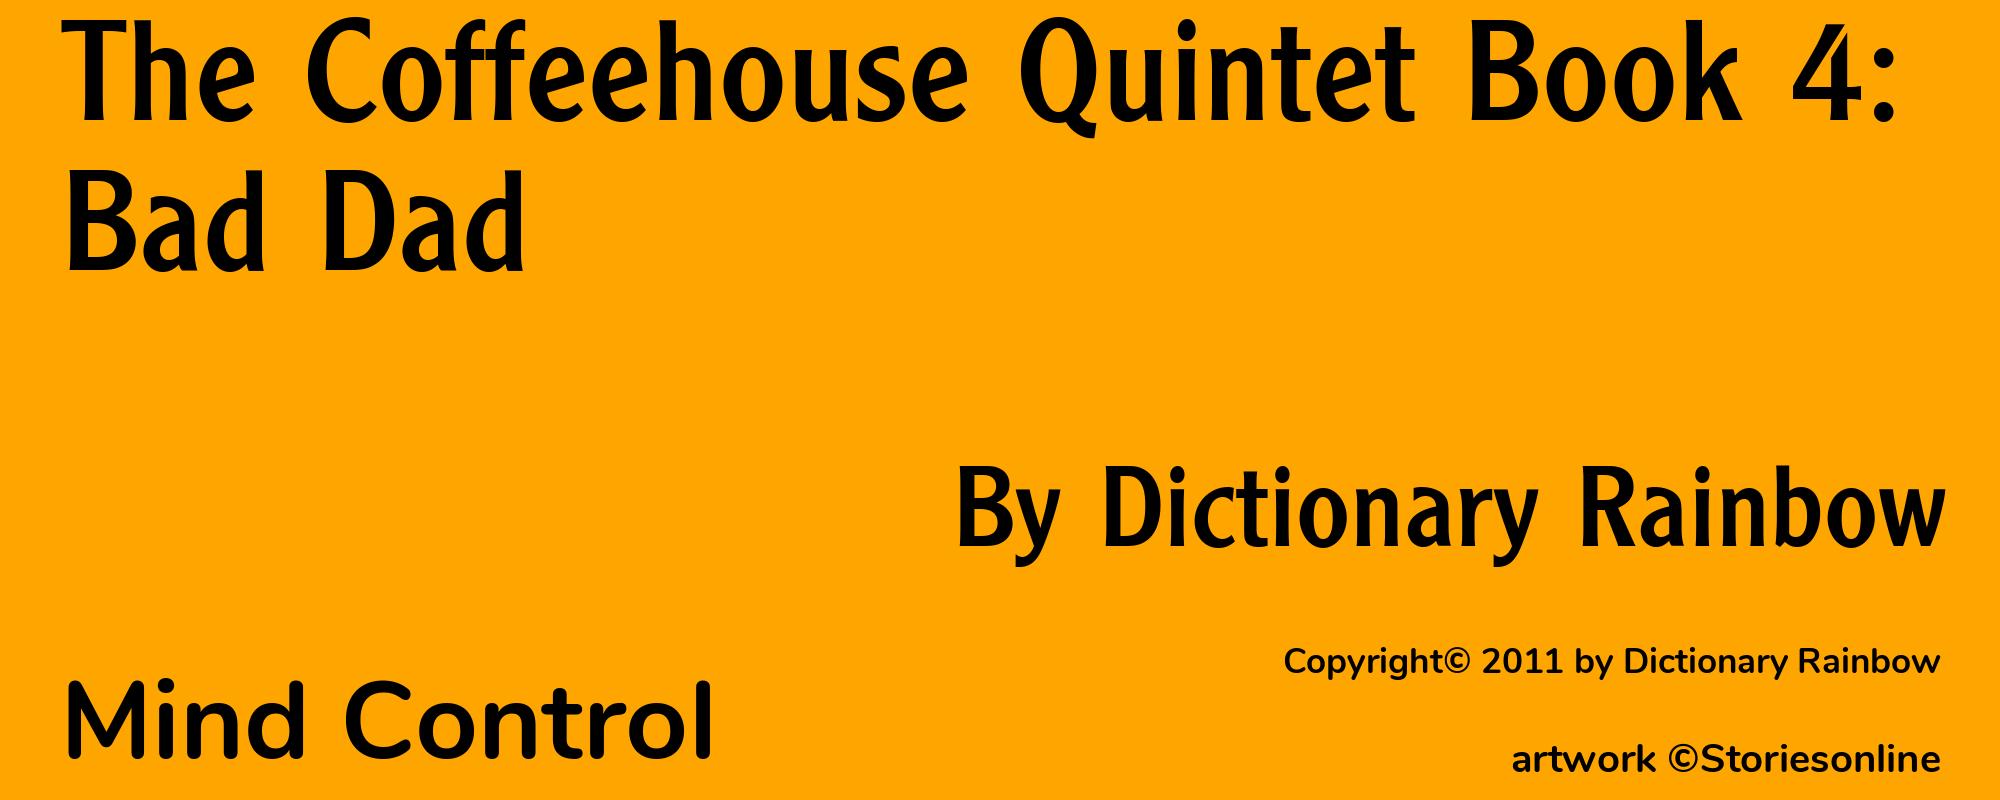 The Coffeehouse Quintet Book 4: Bad Dad - Cover